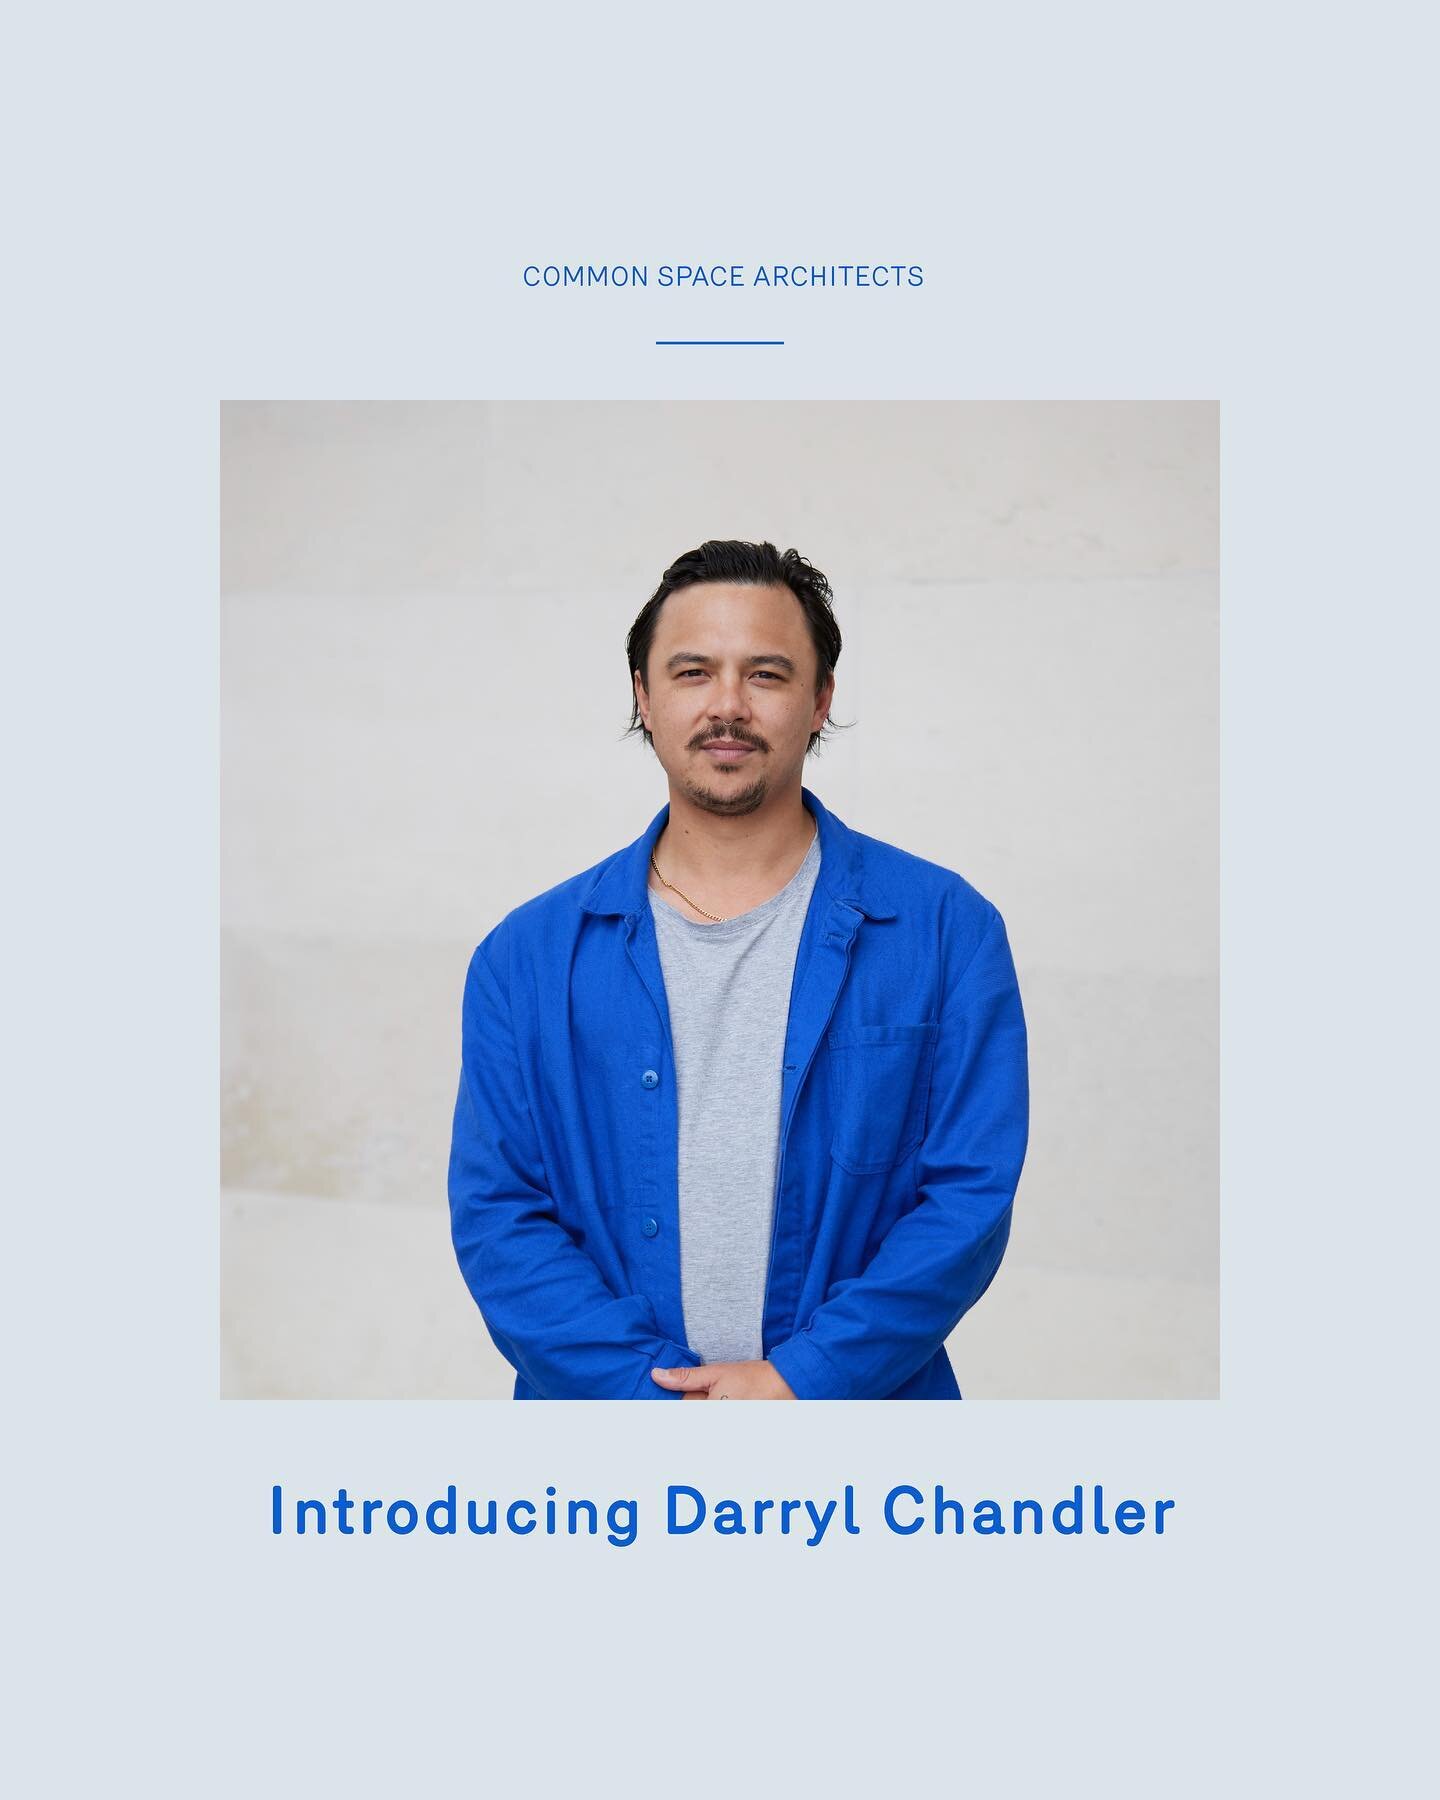 Introducing Darryl Chandler. 
Darryl is a senior designer at Common Space. He has worked in New Zealand, Abu Dhabi and Australia. The past 7 years he has spent with CHROFI (Sydney) as a core member of their design team on large projects and more inti